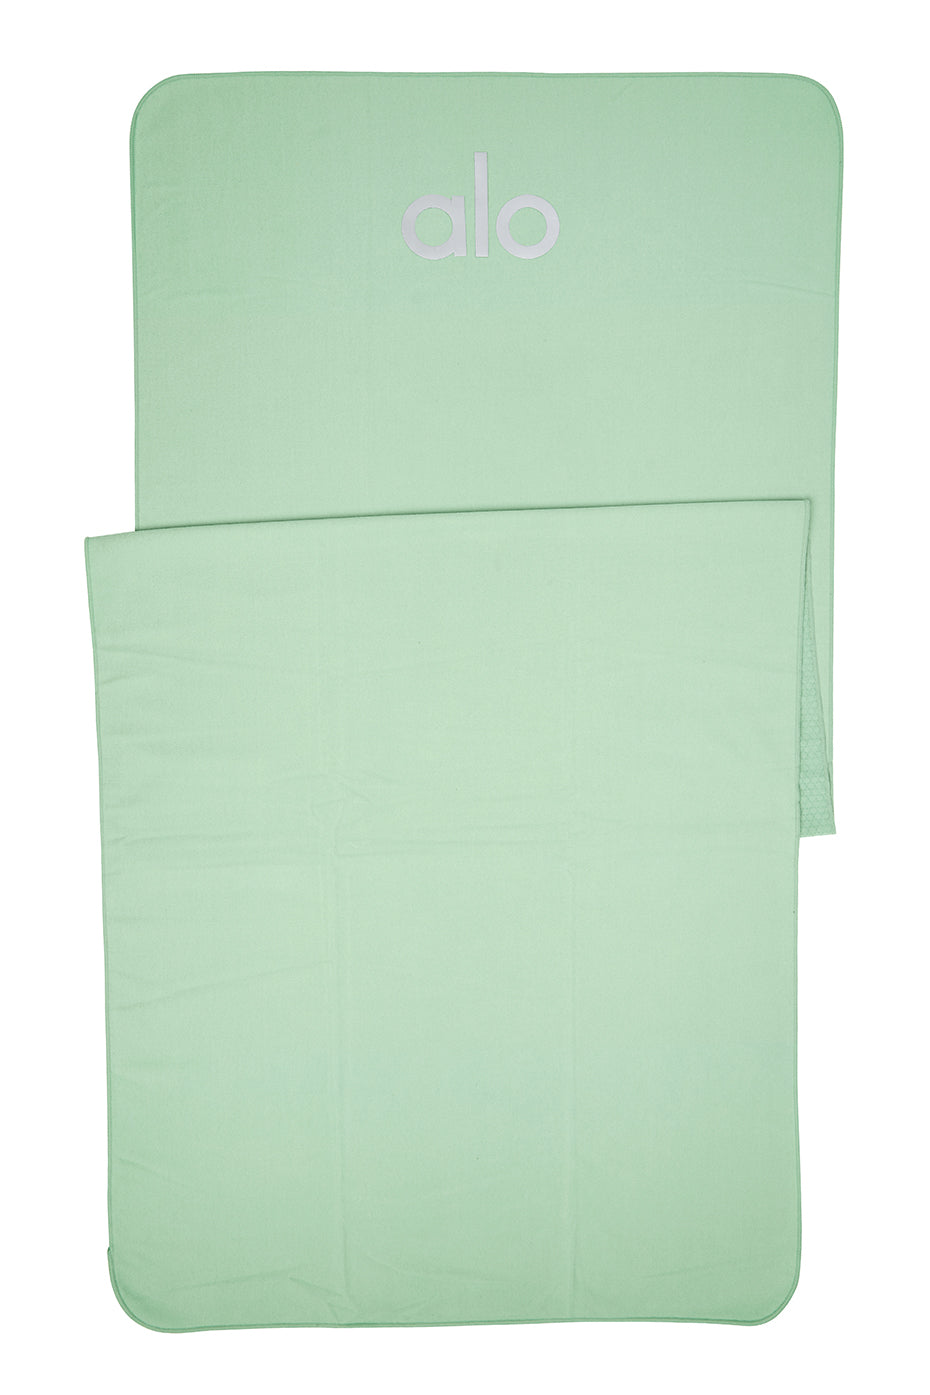 Grounded No-Slip Towel in Honeydew by Alo Yoga - International